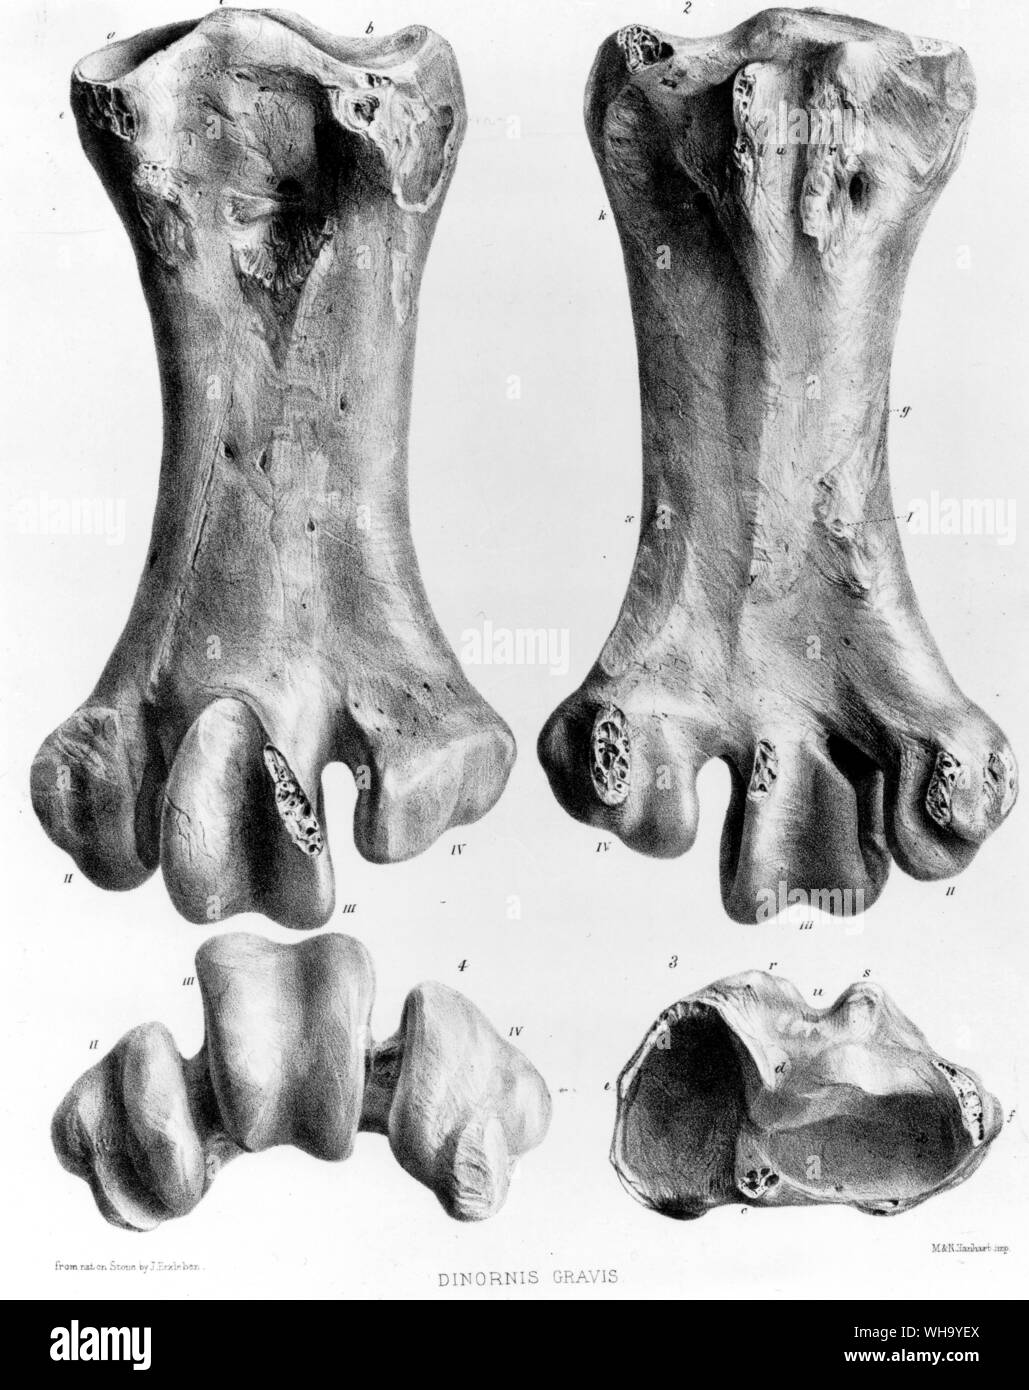 Foot bones (metatarsi) of the Greater Broad-billed Moa. Lithograph by James Erxleben from the Transactions of the Zoological Society of London, Vol. 8 (1873) Stock Photo